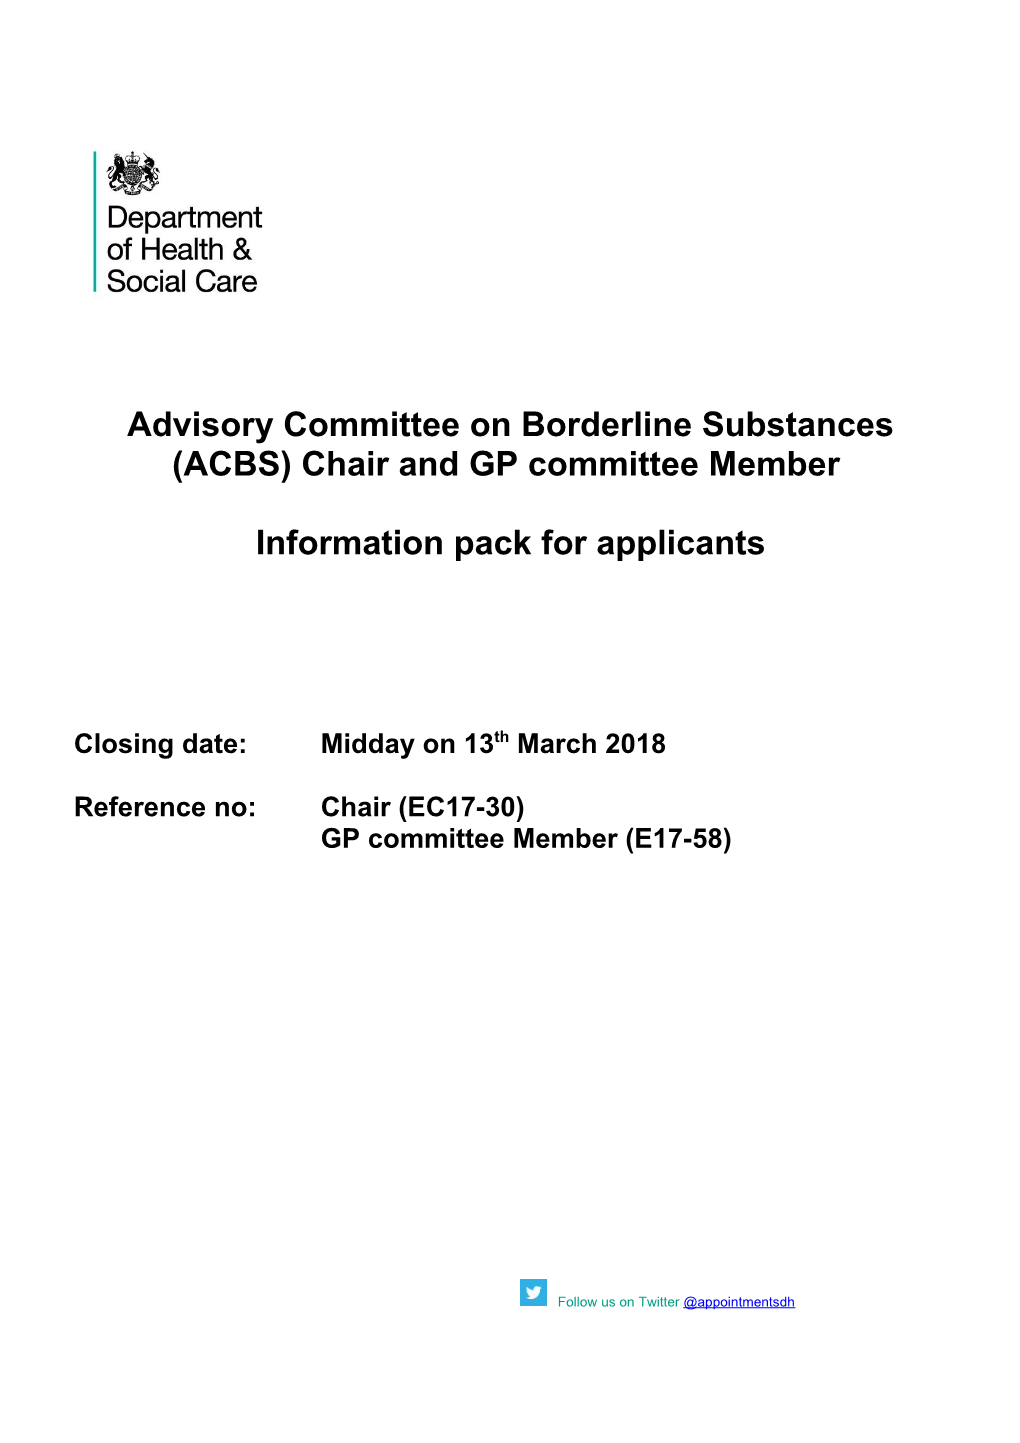 Advisory Committee on Borderline Substances (ACBS) Chair and GP Committee Member